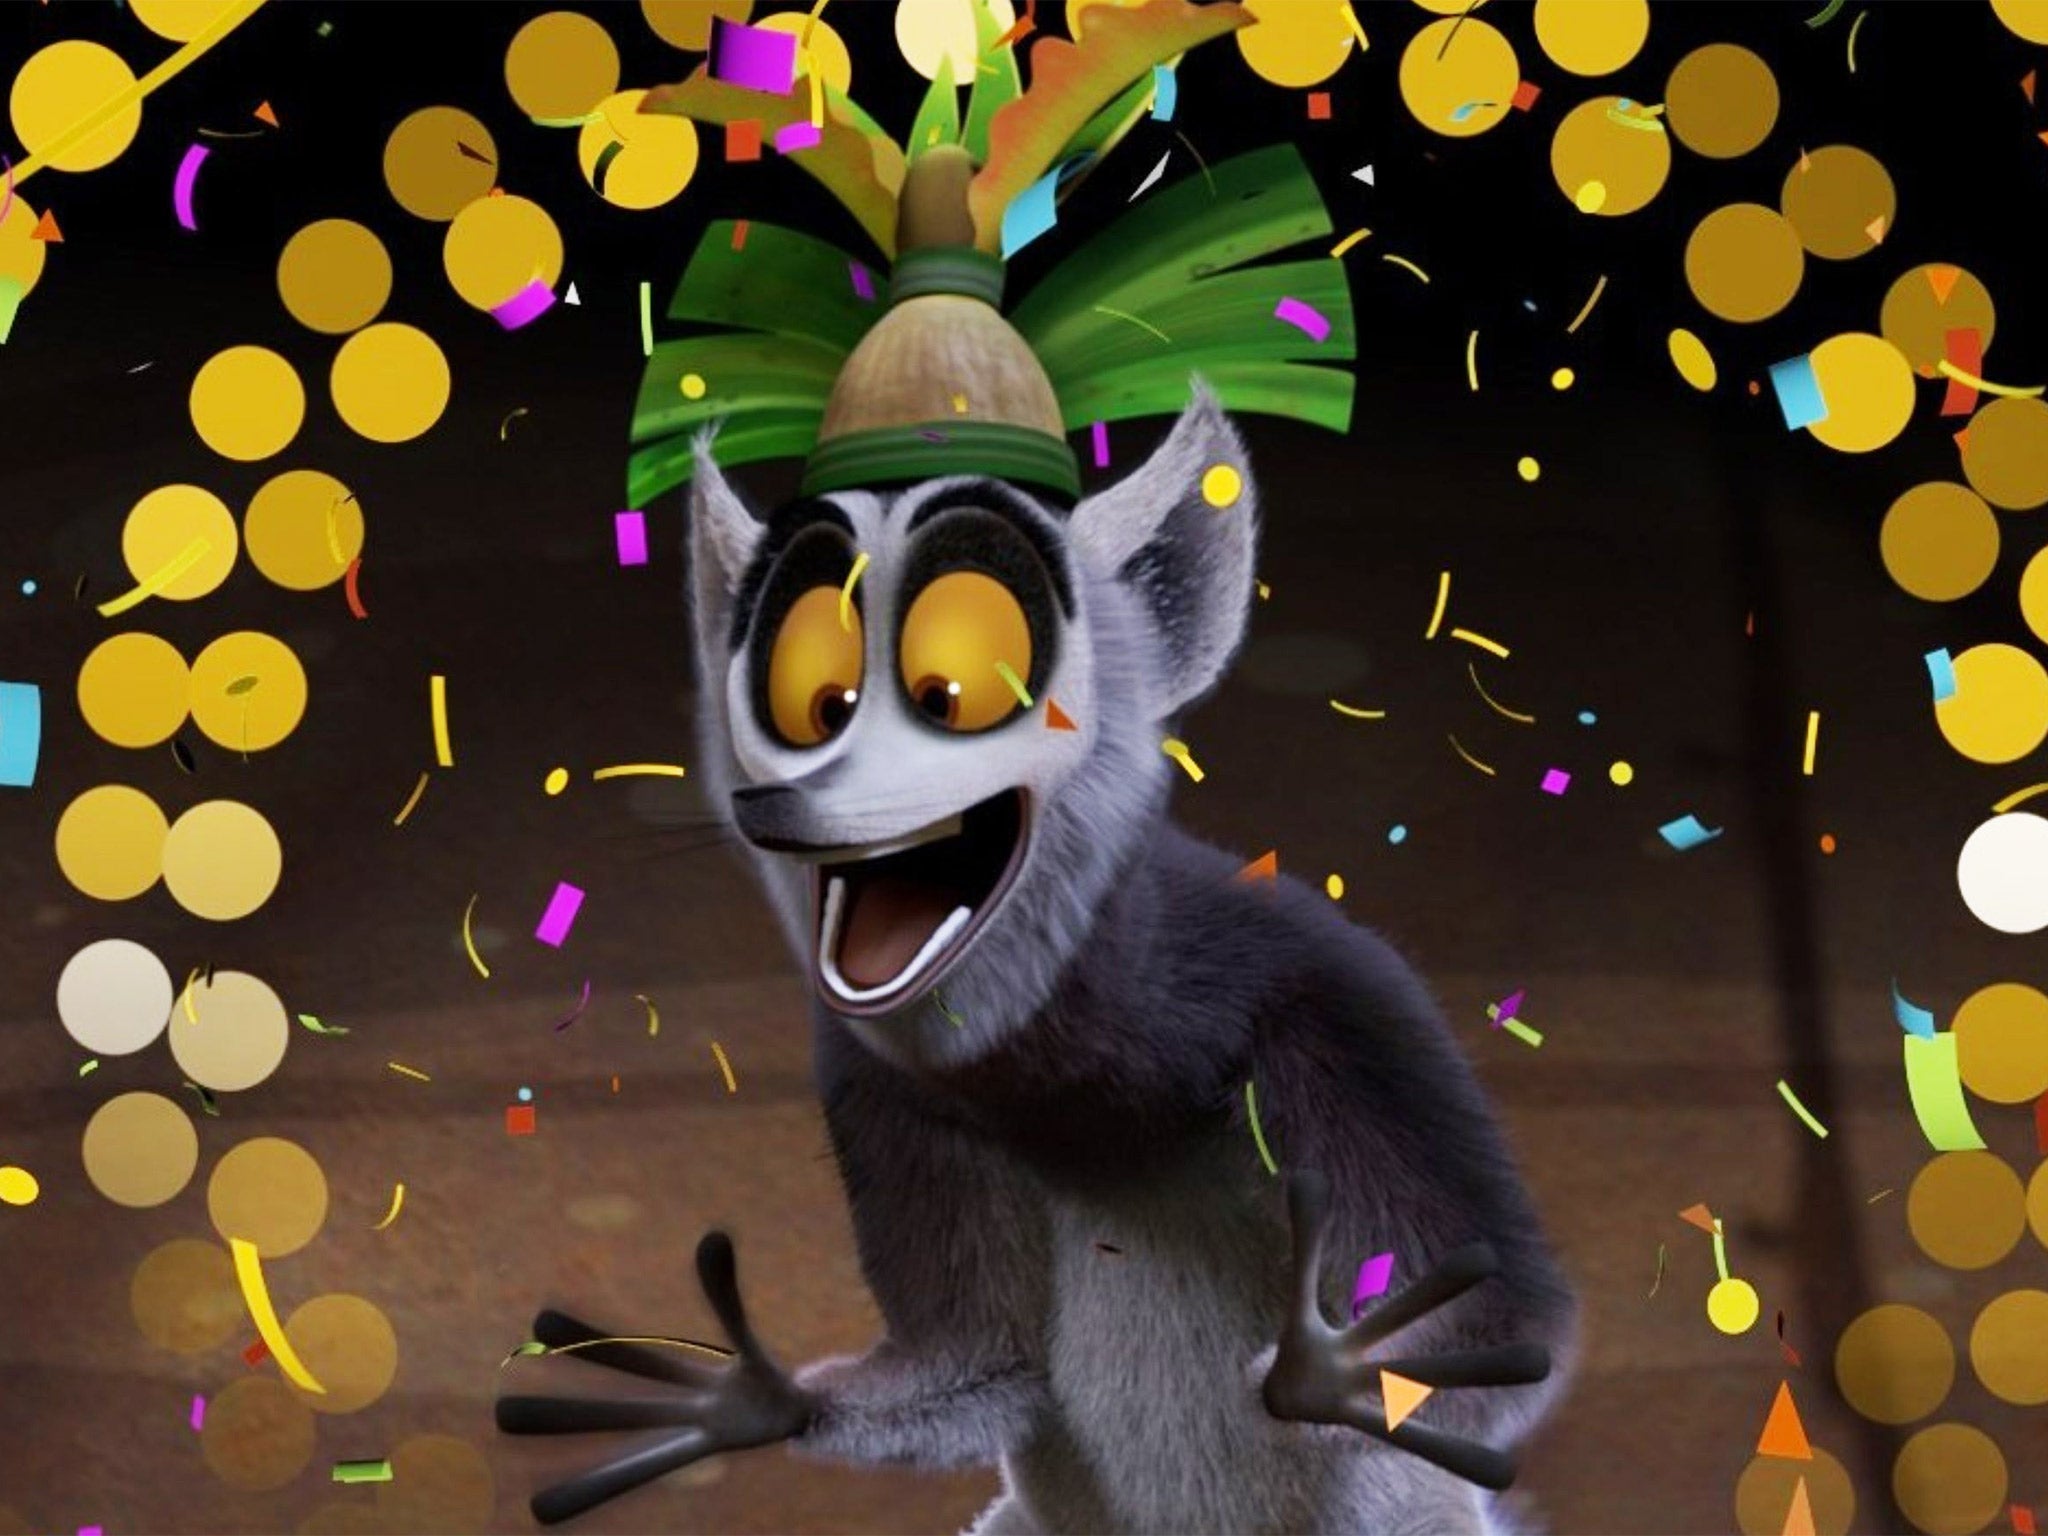 King Julien will countdown to the New Year on Netflix